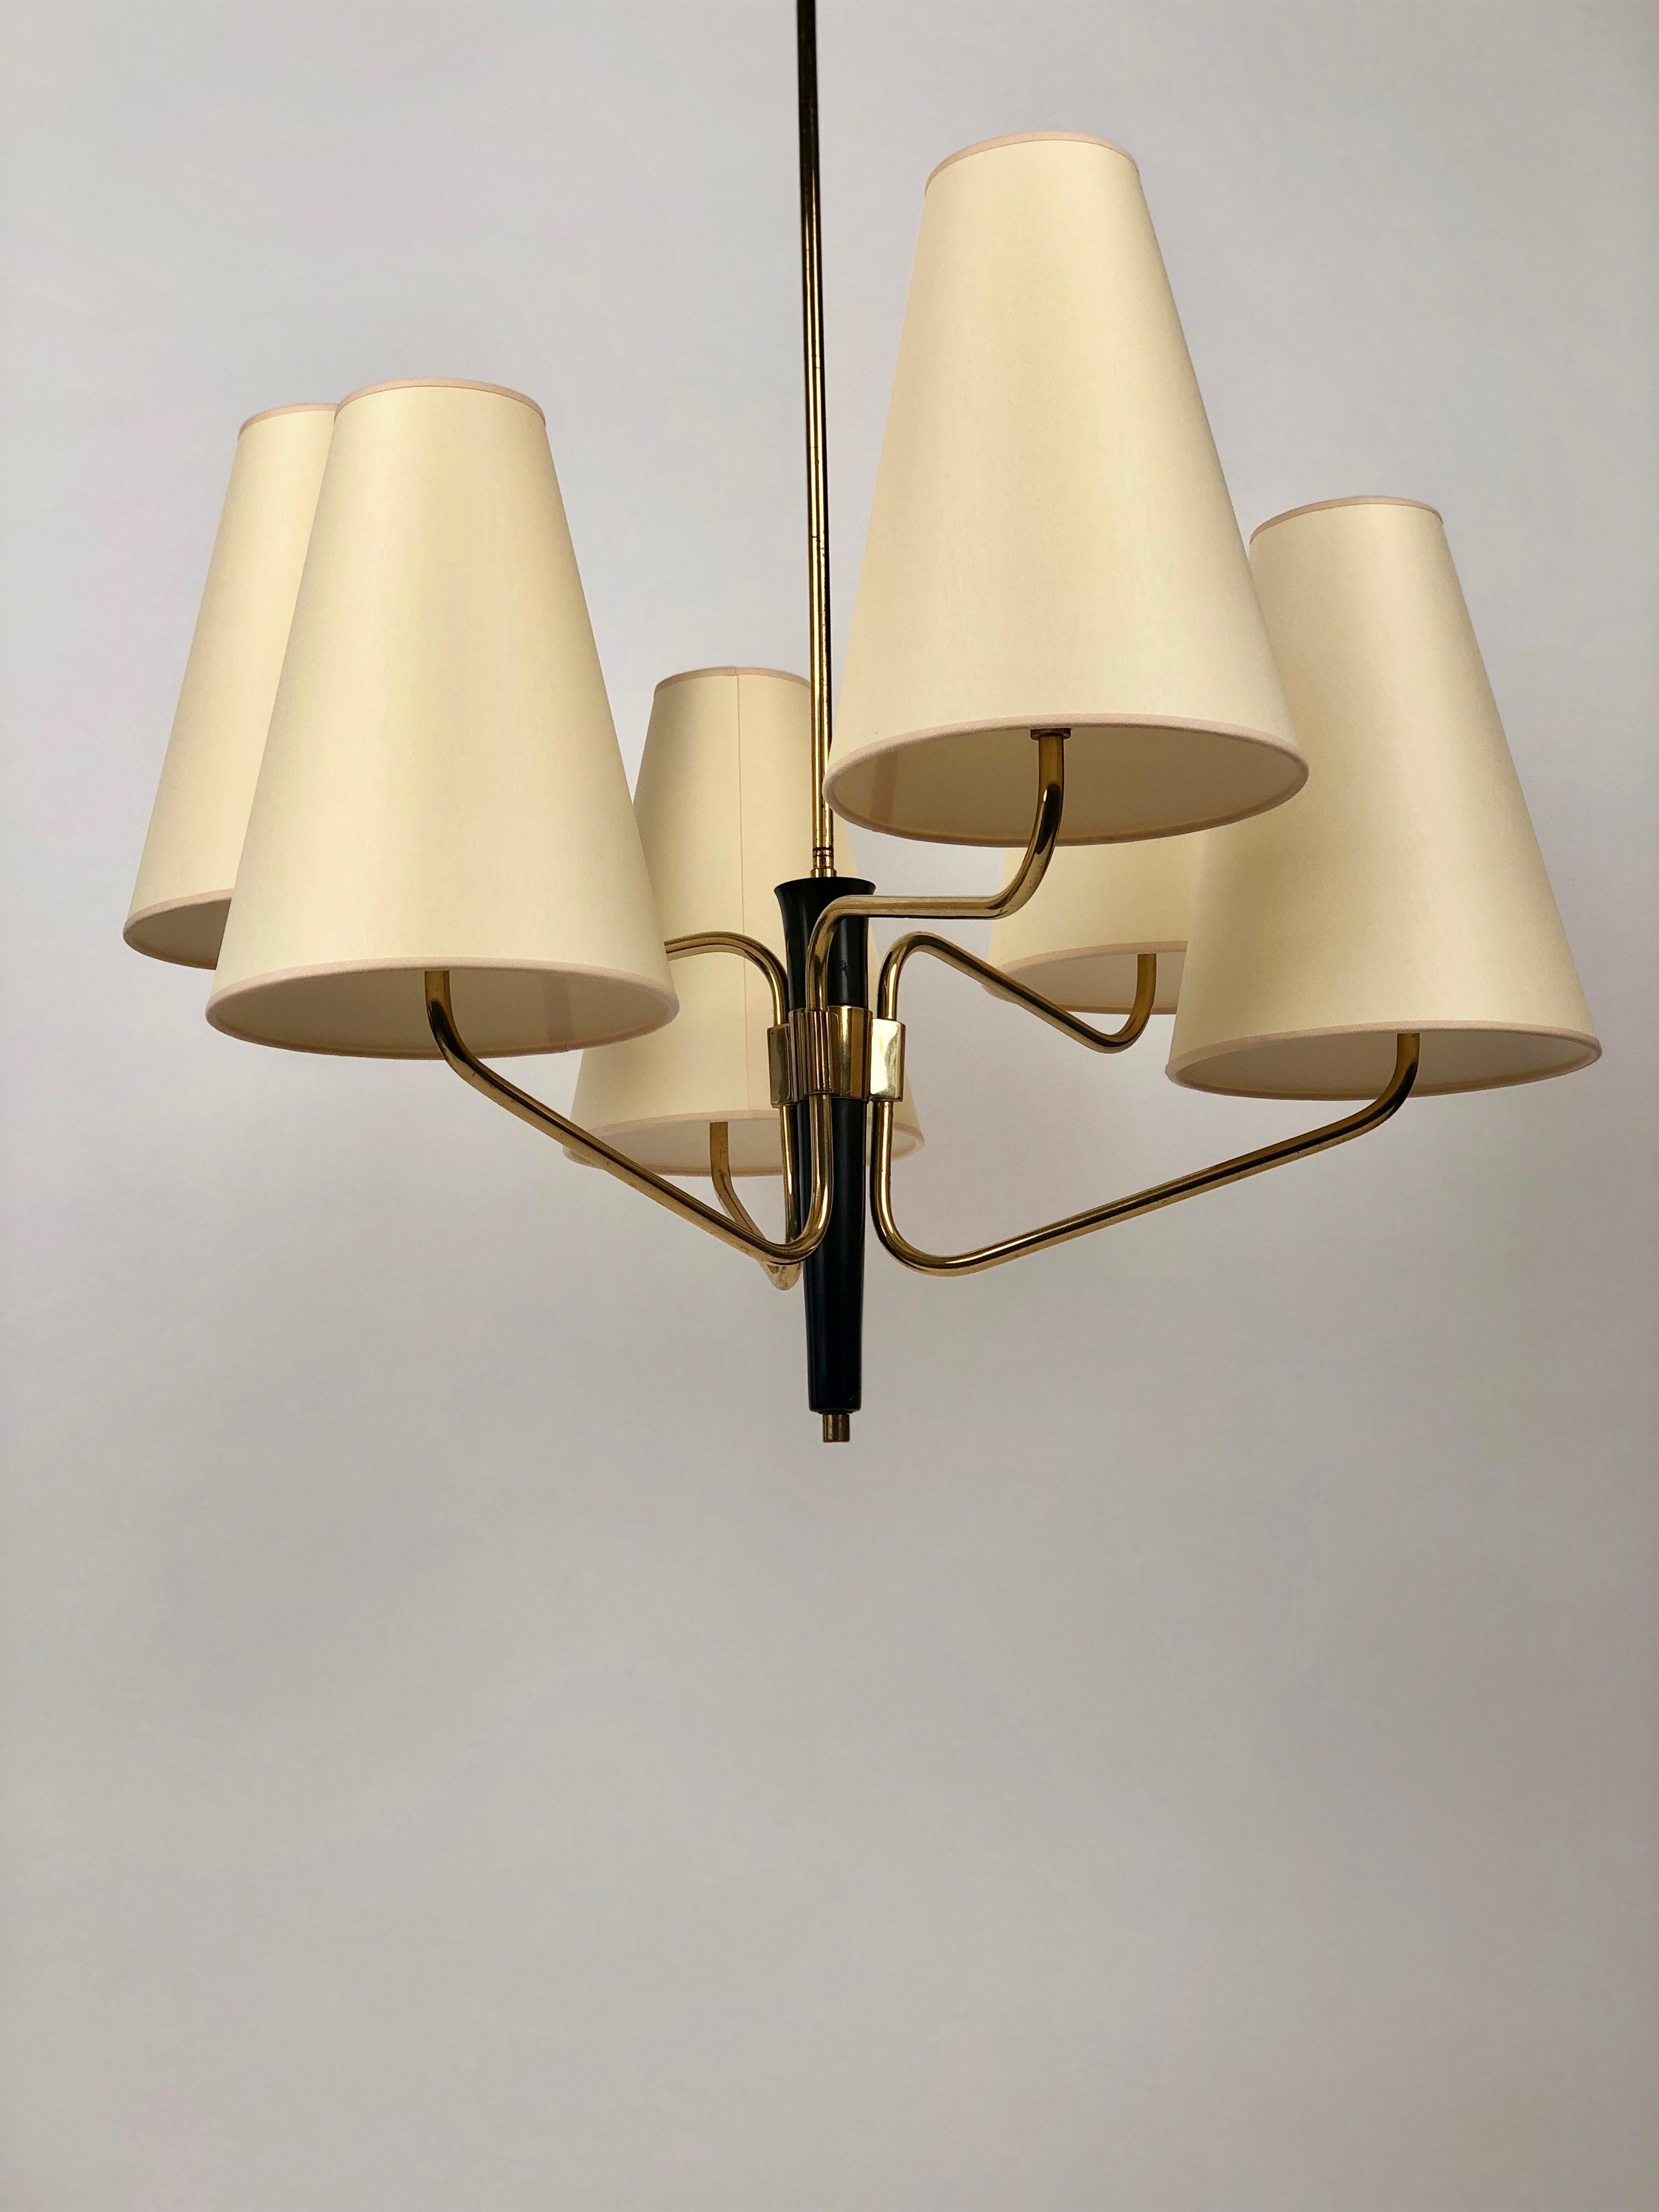 Large pendant lamp with brass arms and blackened corpus.
Six silk shades positioned on three levels giving the lamp a dynamic form.
Minimalistic design with harmony and elegance.
Manufactured in Austria around 1965 by the company Rupert Nikoll.